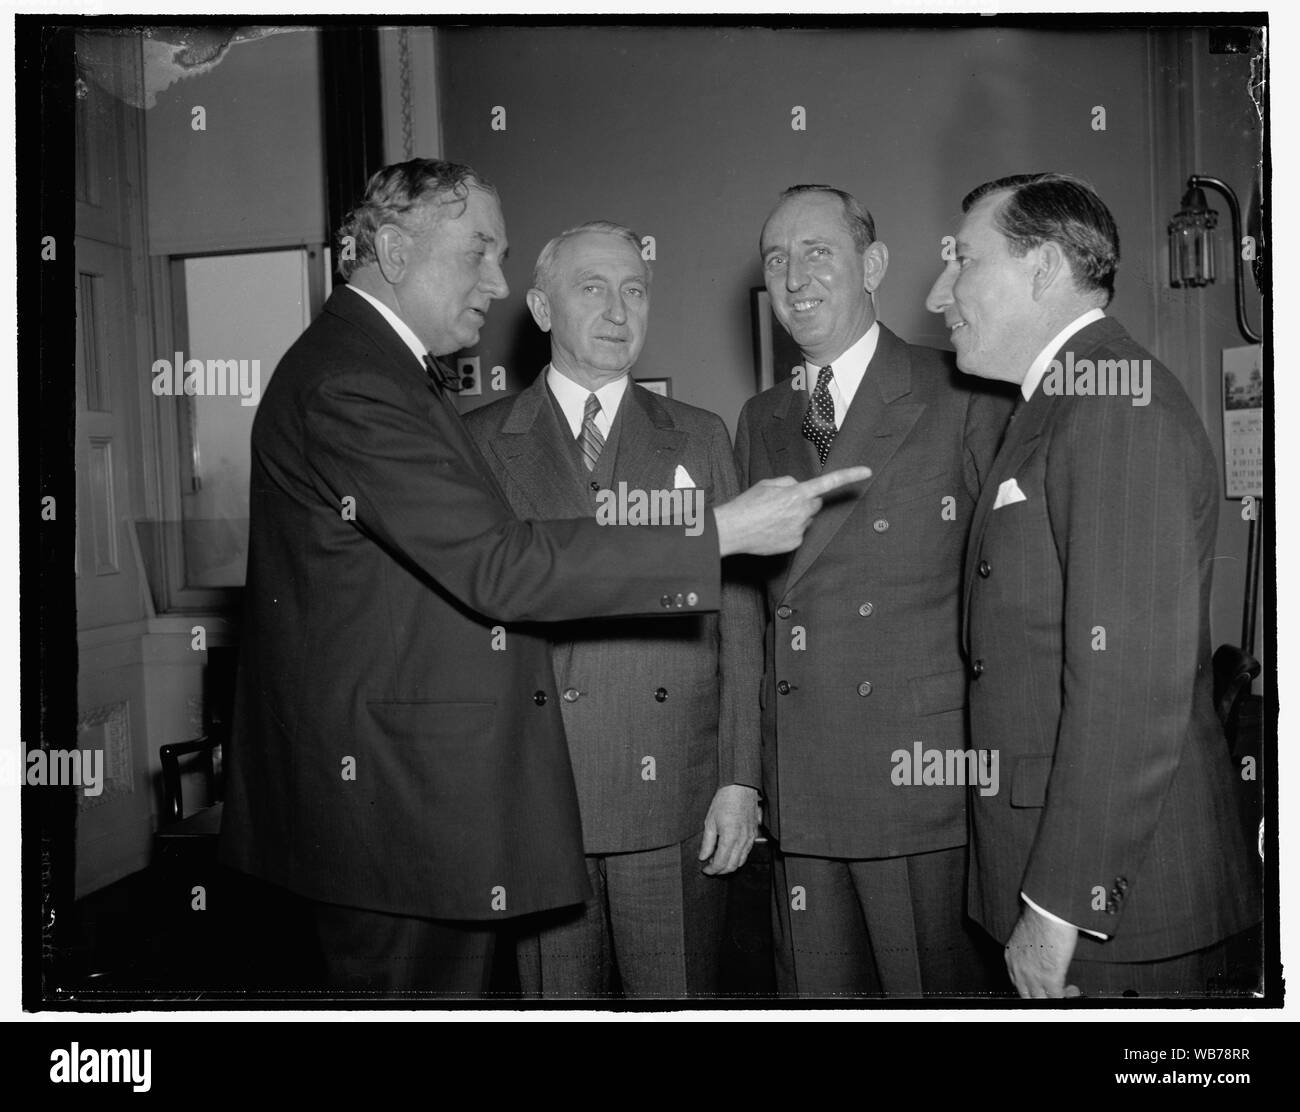 Filibuster against anti-lynching bill. Washington, D.C., Jan. 27. Members of the bloc of Southern Senators who have been filibusting against the anti-lynching bill for the last 20 days and are still going strong, left to right: Senator Tom Connaly, of Texas, Sen. Walter F. George, of Ga.; Sen. Richard Russell of Ga.; and Sen. Claude Pepper of Florida, 1/27/38 Abstract/medium: 1 negative : glass ; 4 x 5 in. or smaller Stock Photo